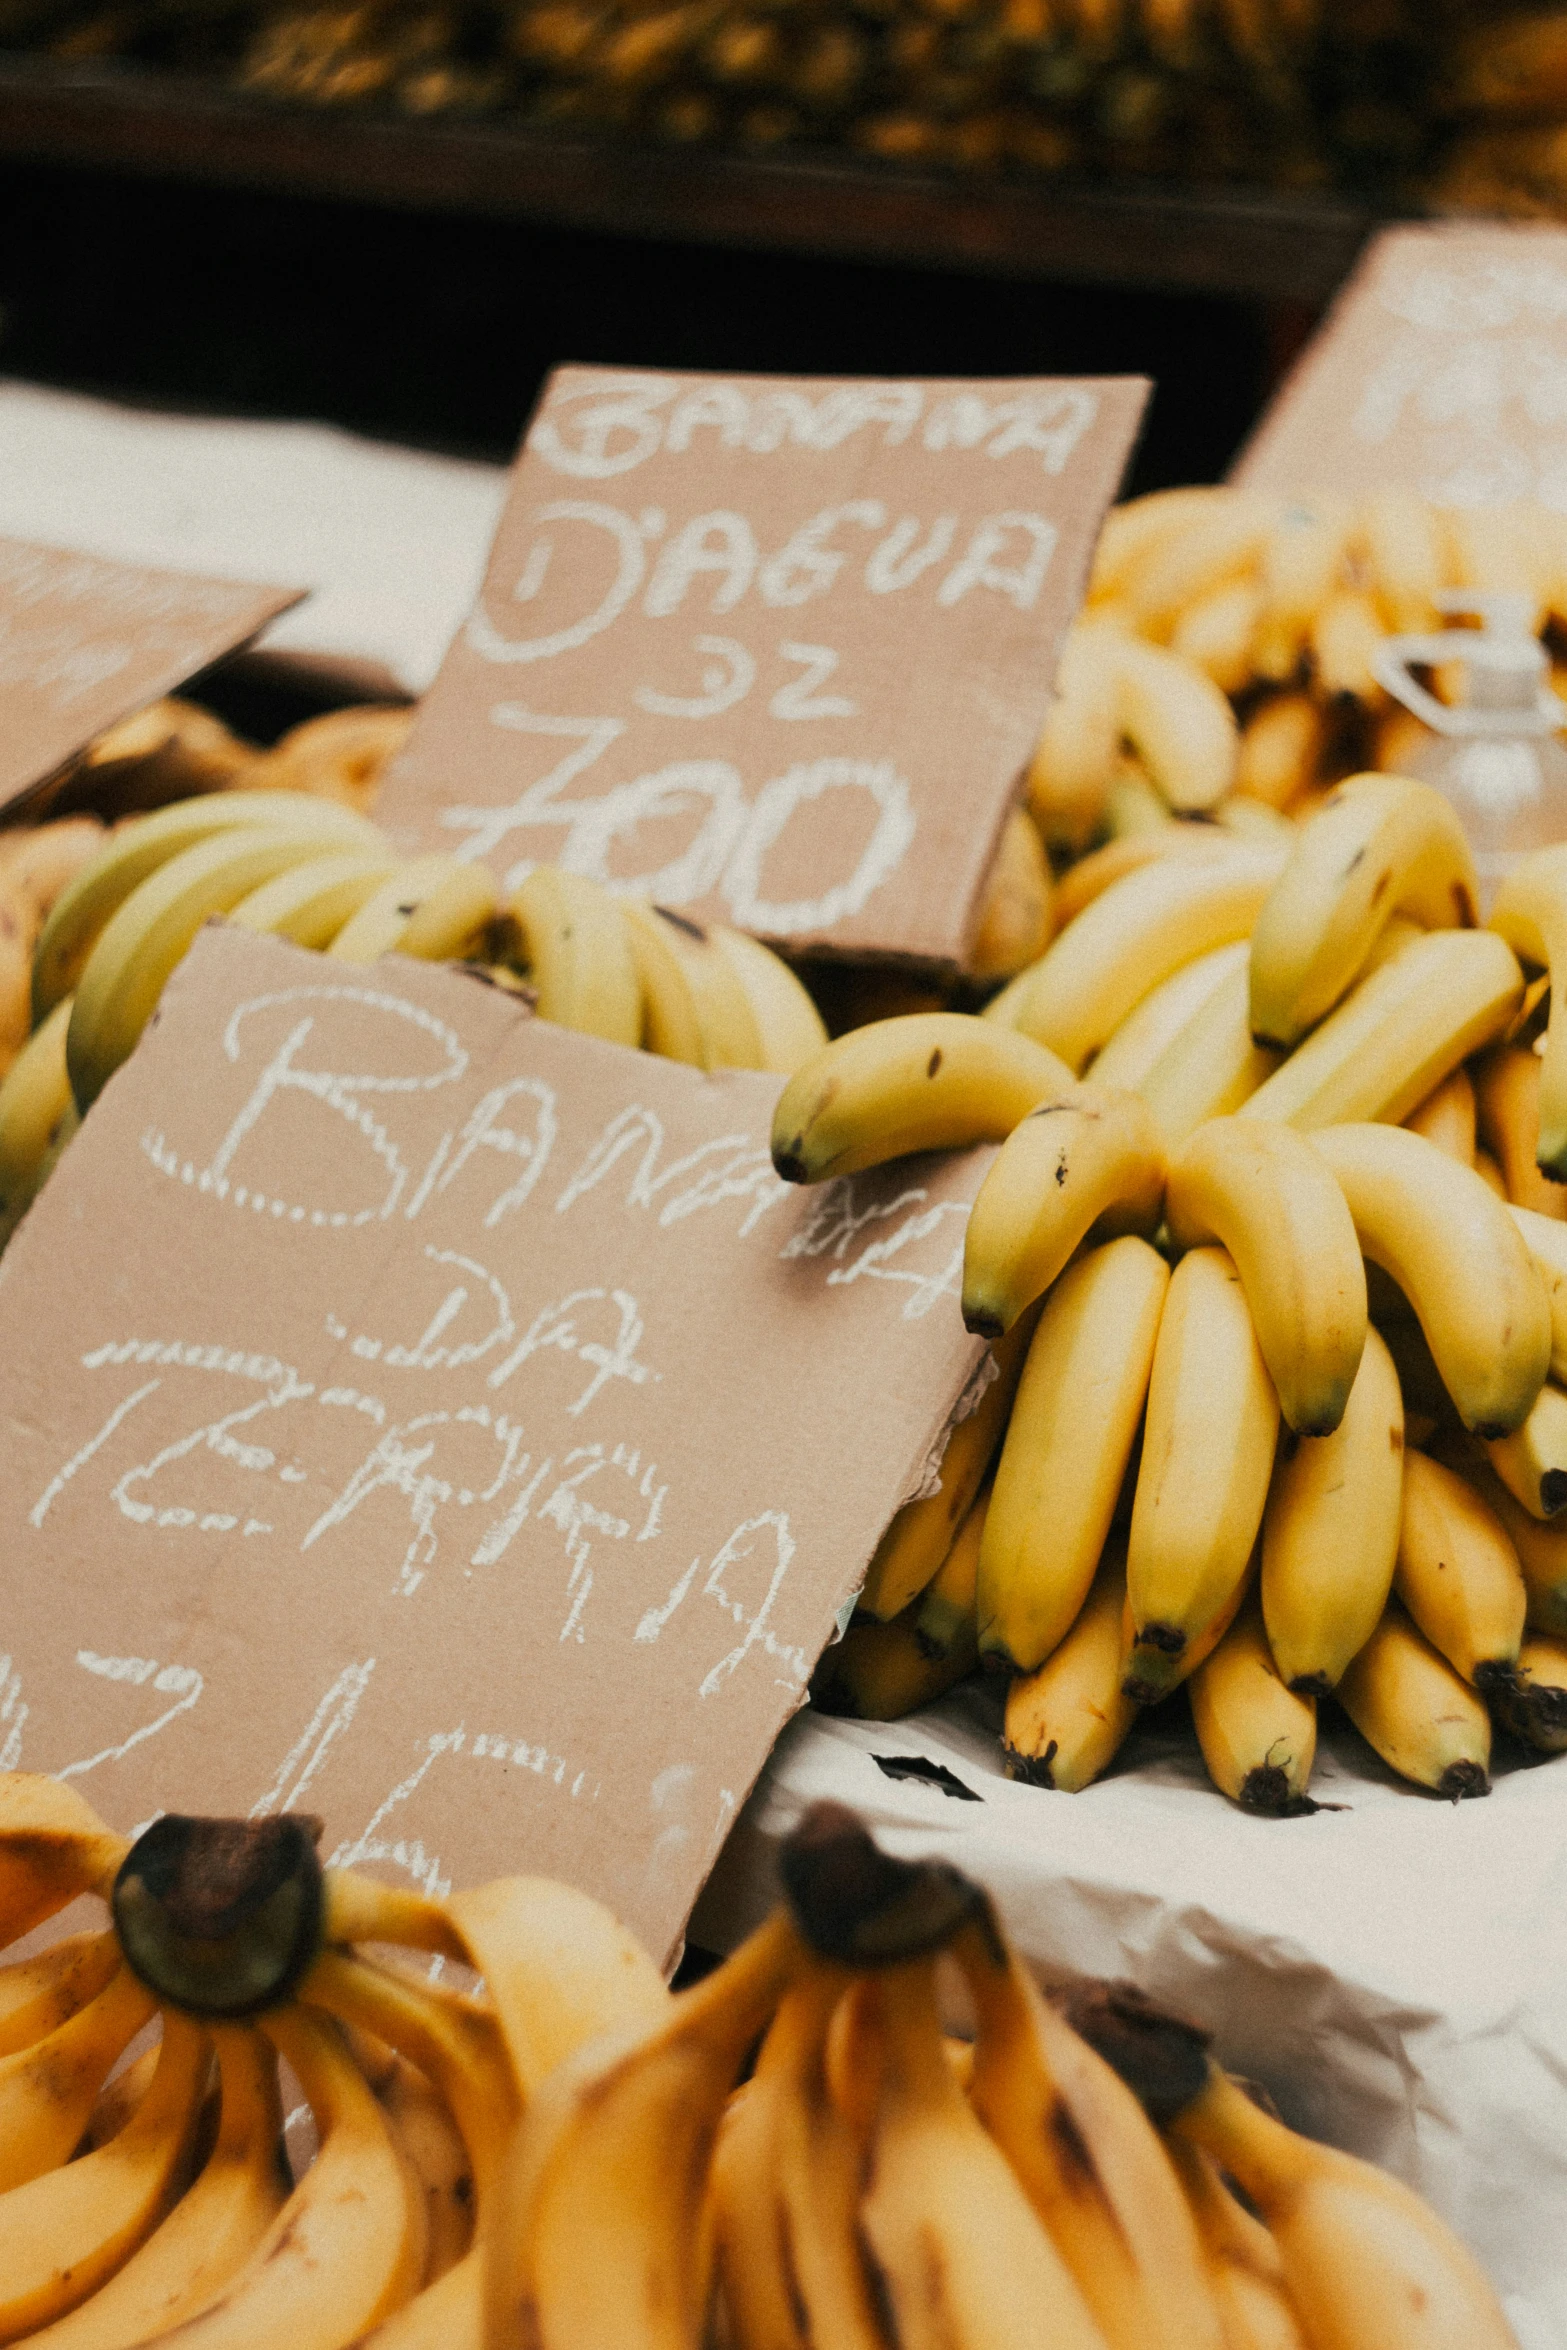 bananas for sale at a market in spain